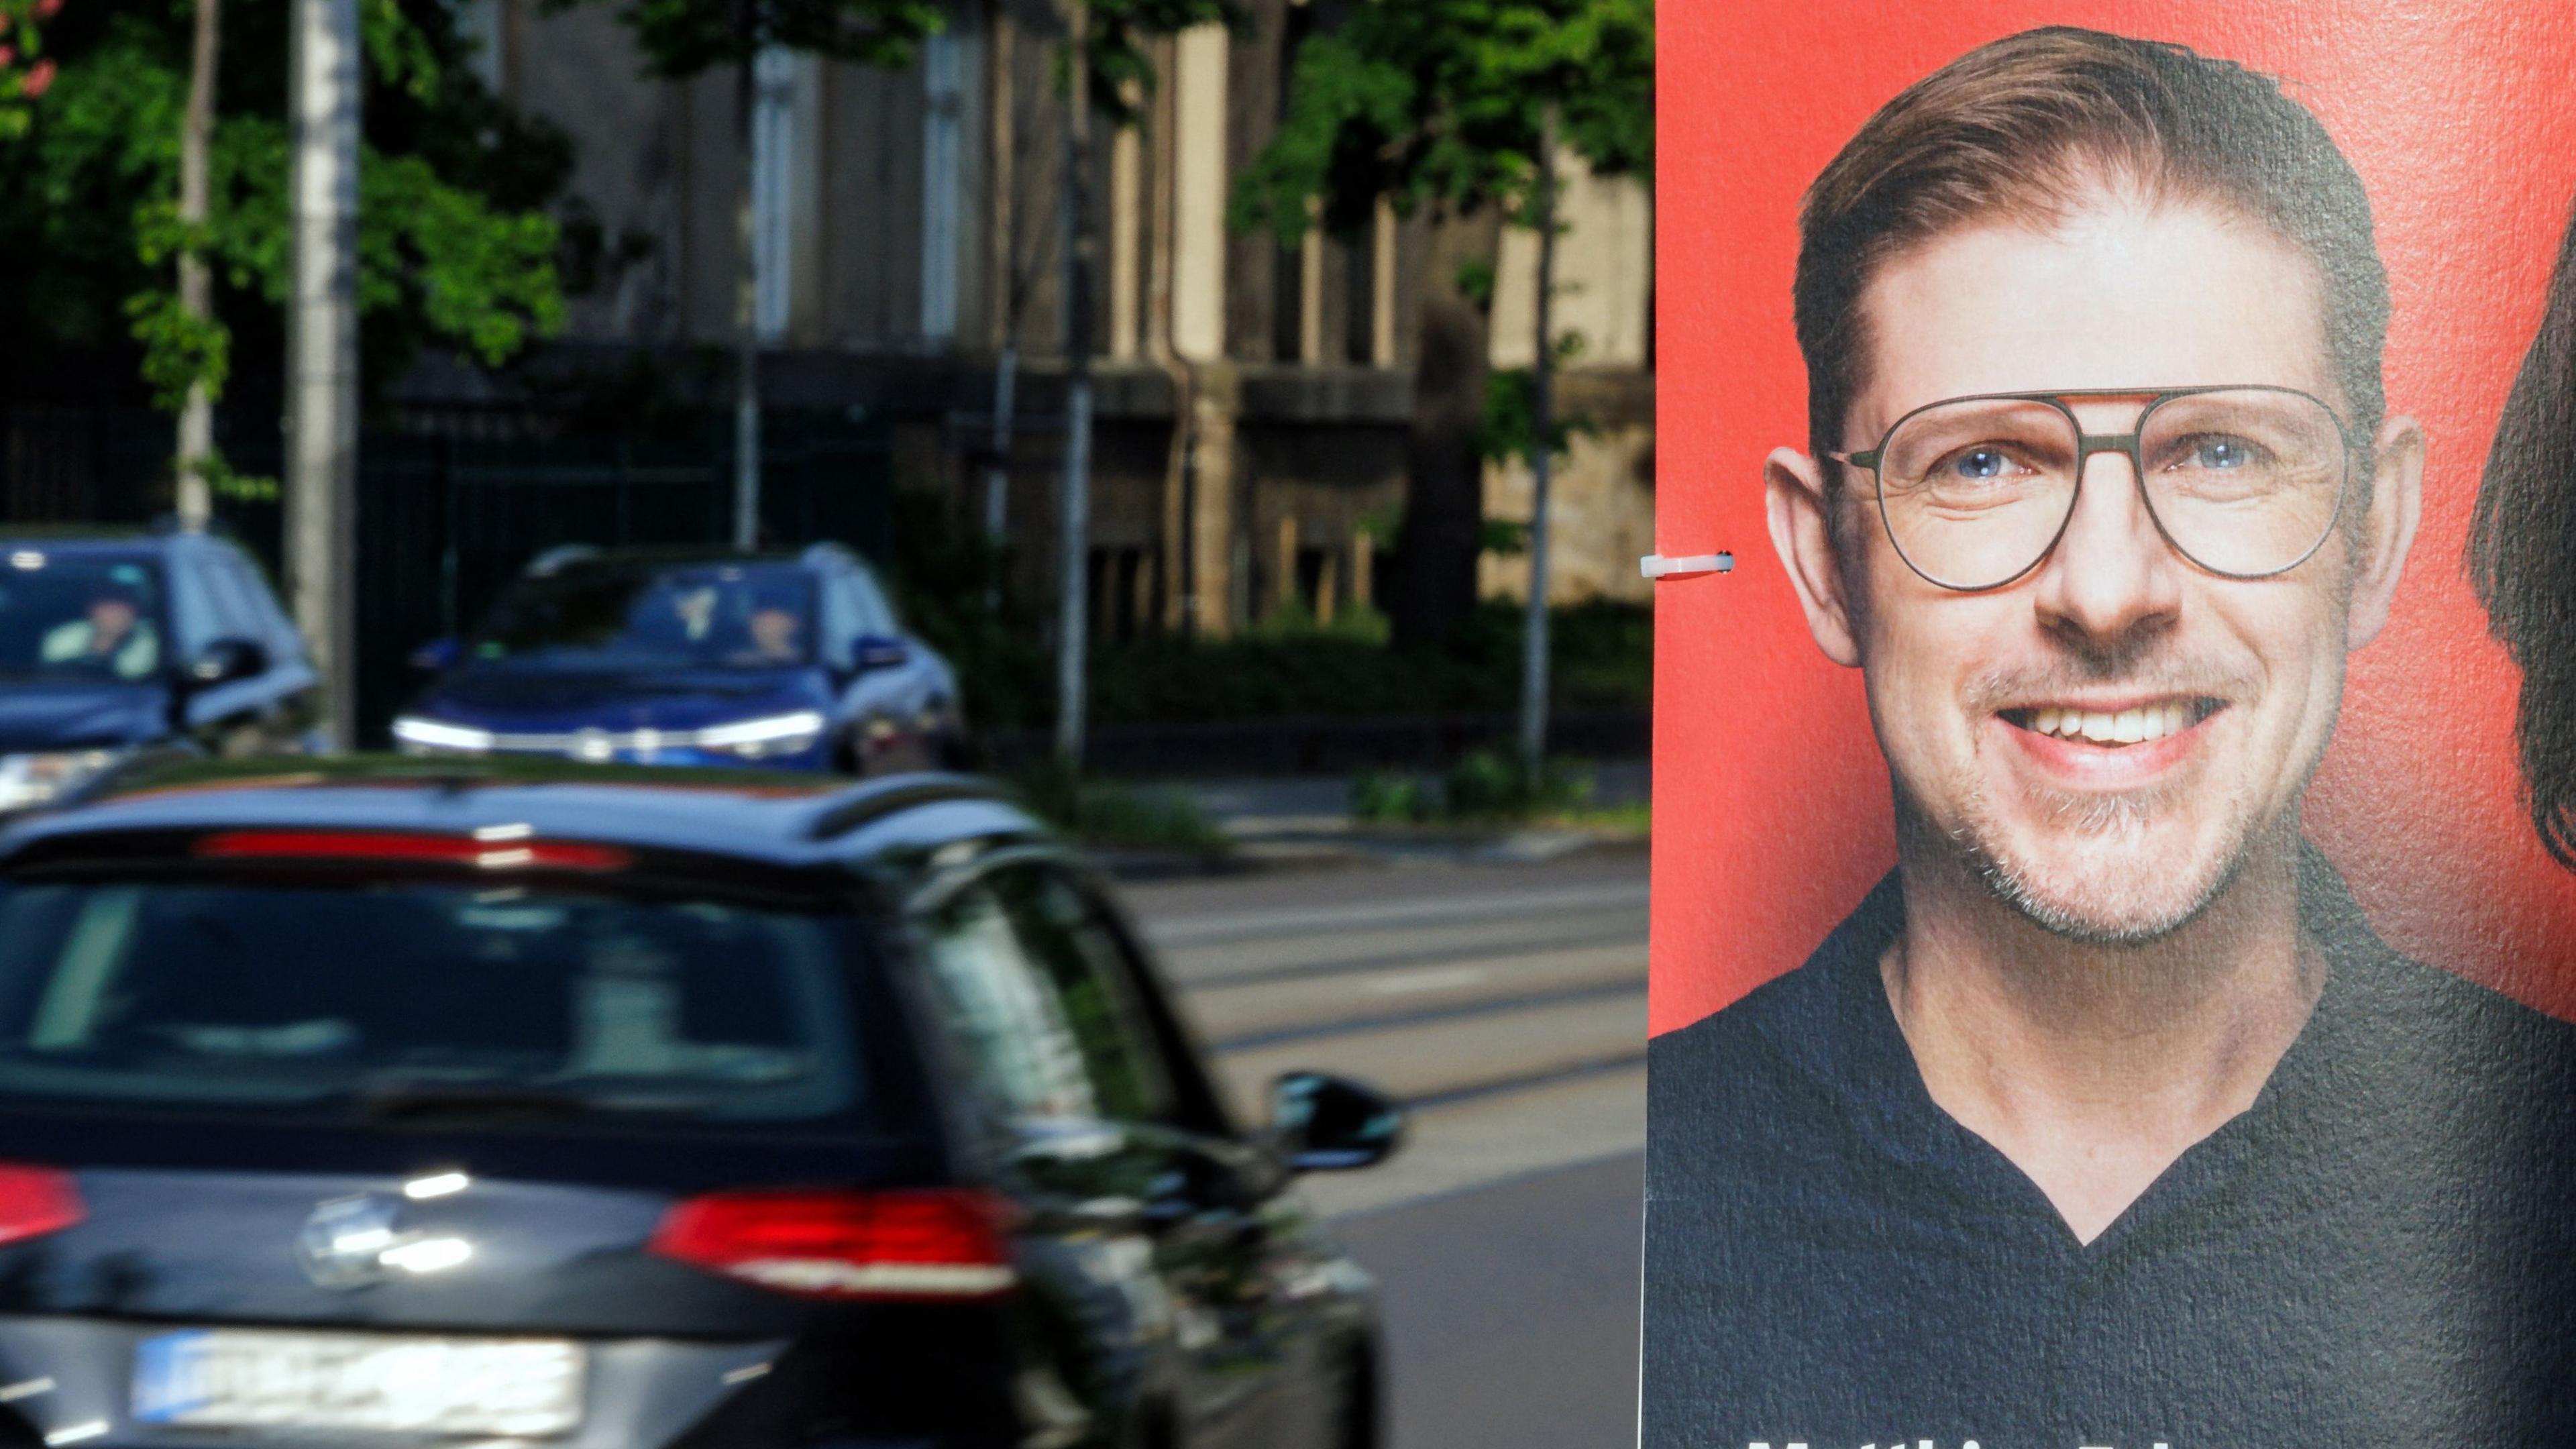 An election poster showing Germany's Social Democratic Party SPD lead candidate Matthias Ecke for the upcoming European Parliament elections is seen attached to a lamp post along Schandauer Strasse in the city district of Striesen in Dresden, eastern Germany on May 4, 2024. German Chancellor Scholz on May 4 condemned an attack on one of his party's European Parliament deputies as a "threat" to democracy after authorities said a political motive was suspected. Police said four unknown attackers beat up Matthias Ecke, an MEP for the Social Democratic Party (SPD), as he put up EU election posters in the eastern city of Dresden on Friday night, May 3. Ecke, 41, was "seriously injured" and required an operation after the attack, his party said. Police confirmed he needed hospital treatment. (Photo by JENS SCHLUETER / AFP)